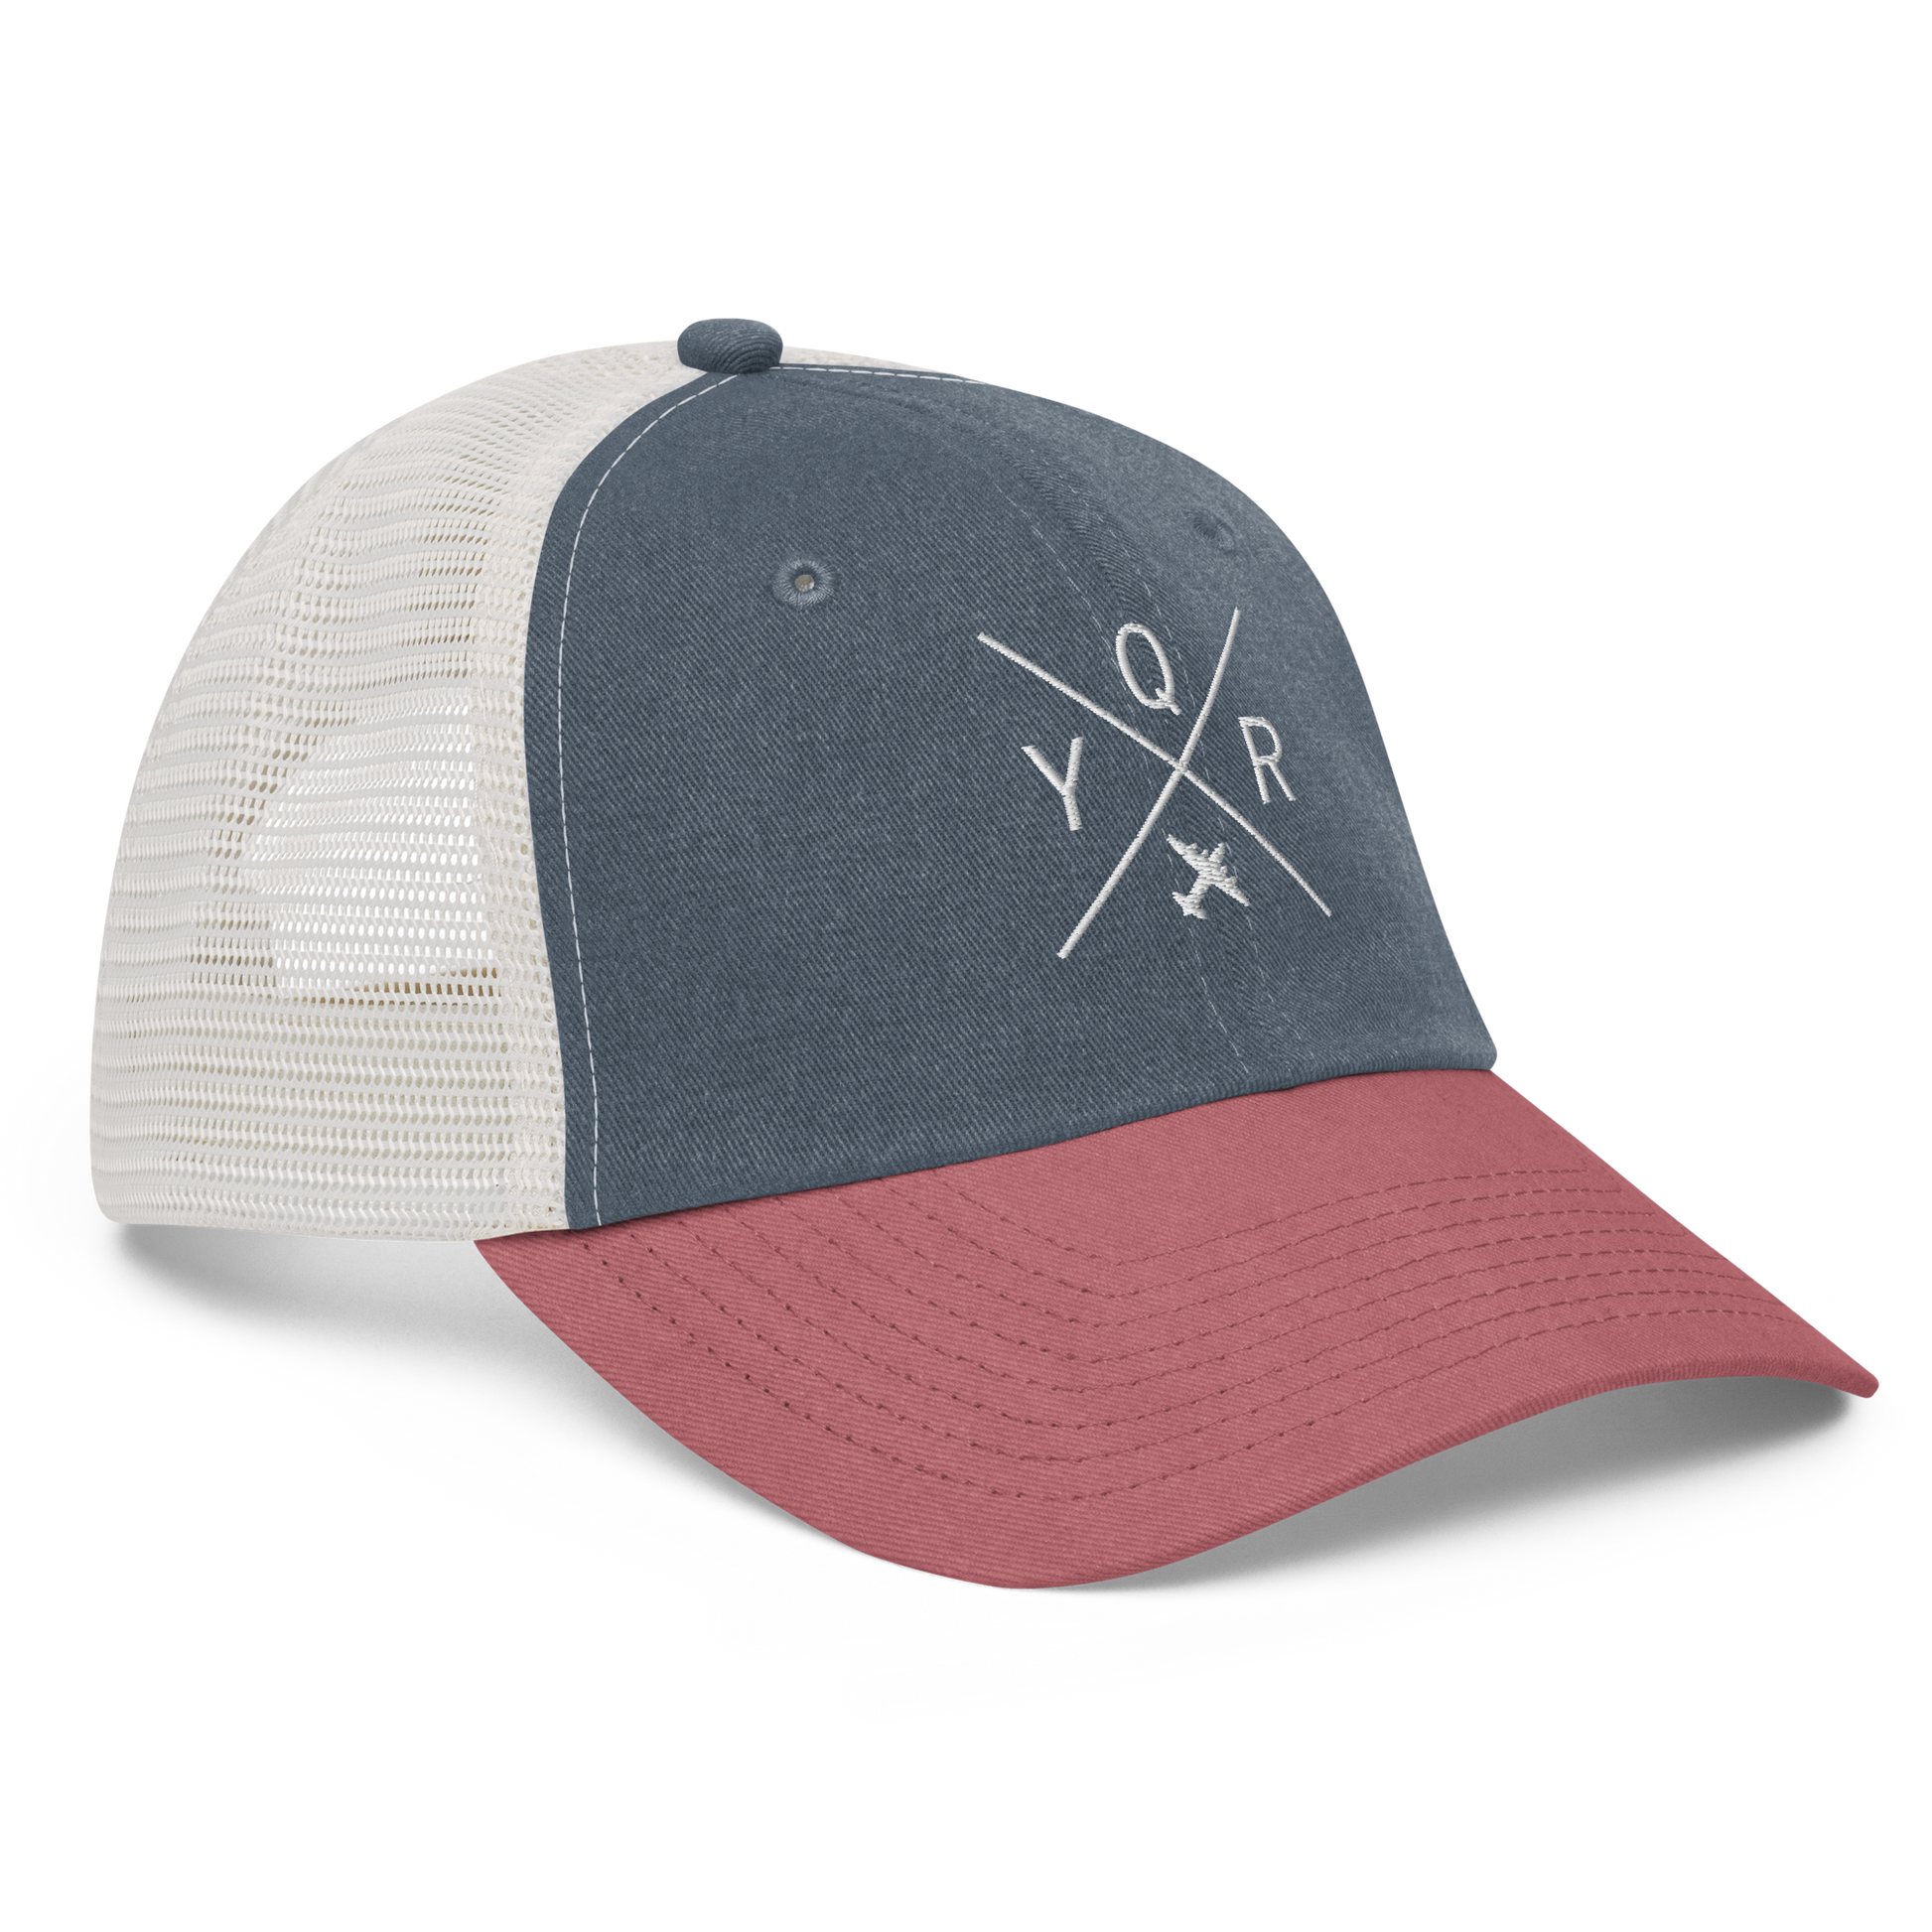 YHM Designs - YQR Regina Pigment-Dyed Trucker Cap - Crossed-X Design with Airport Code and Vintage Propliner - White Embroidery - Image 13